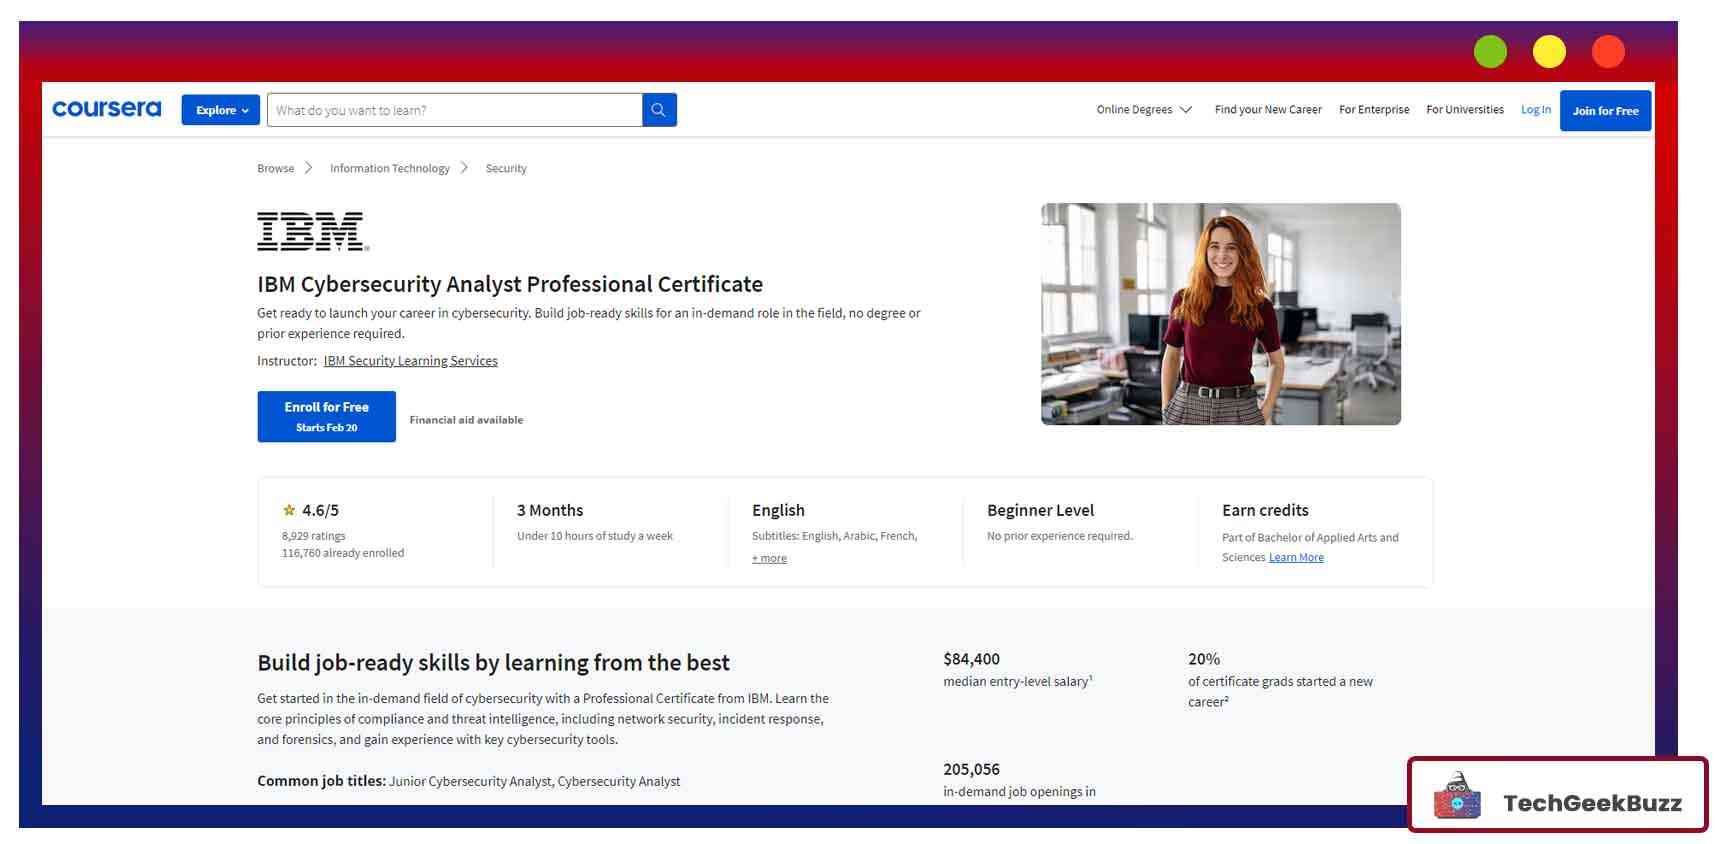  IBM Cybersecurity Analyst Professional Certificate